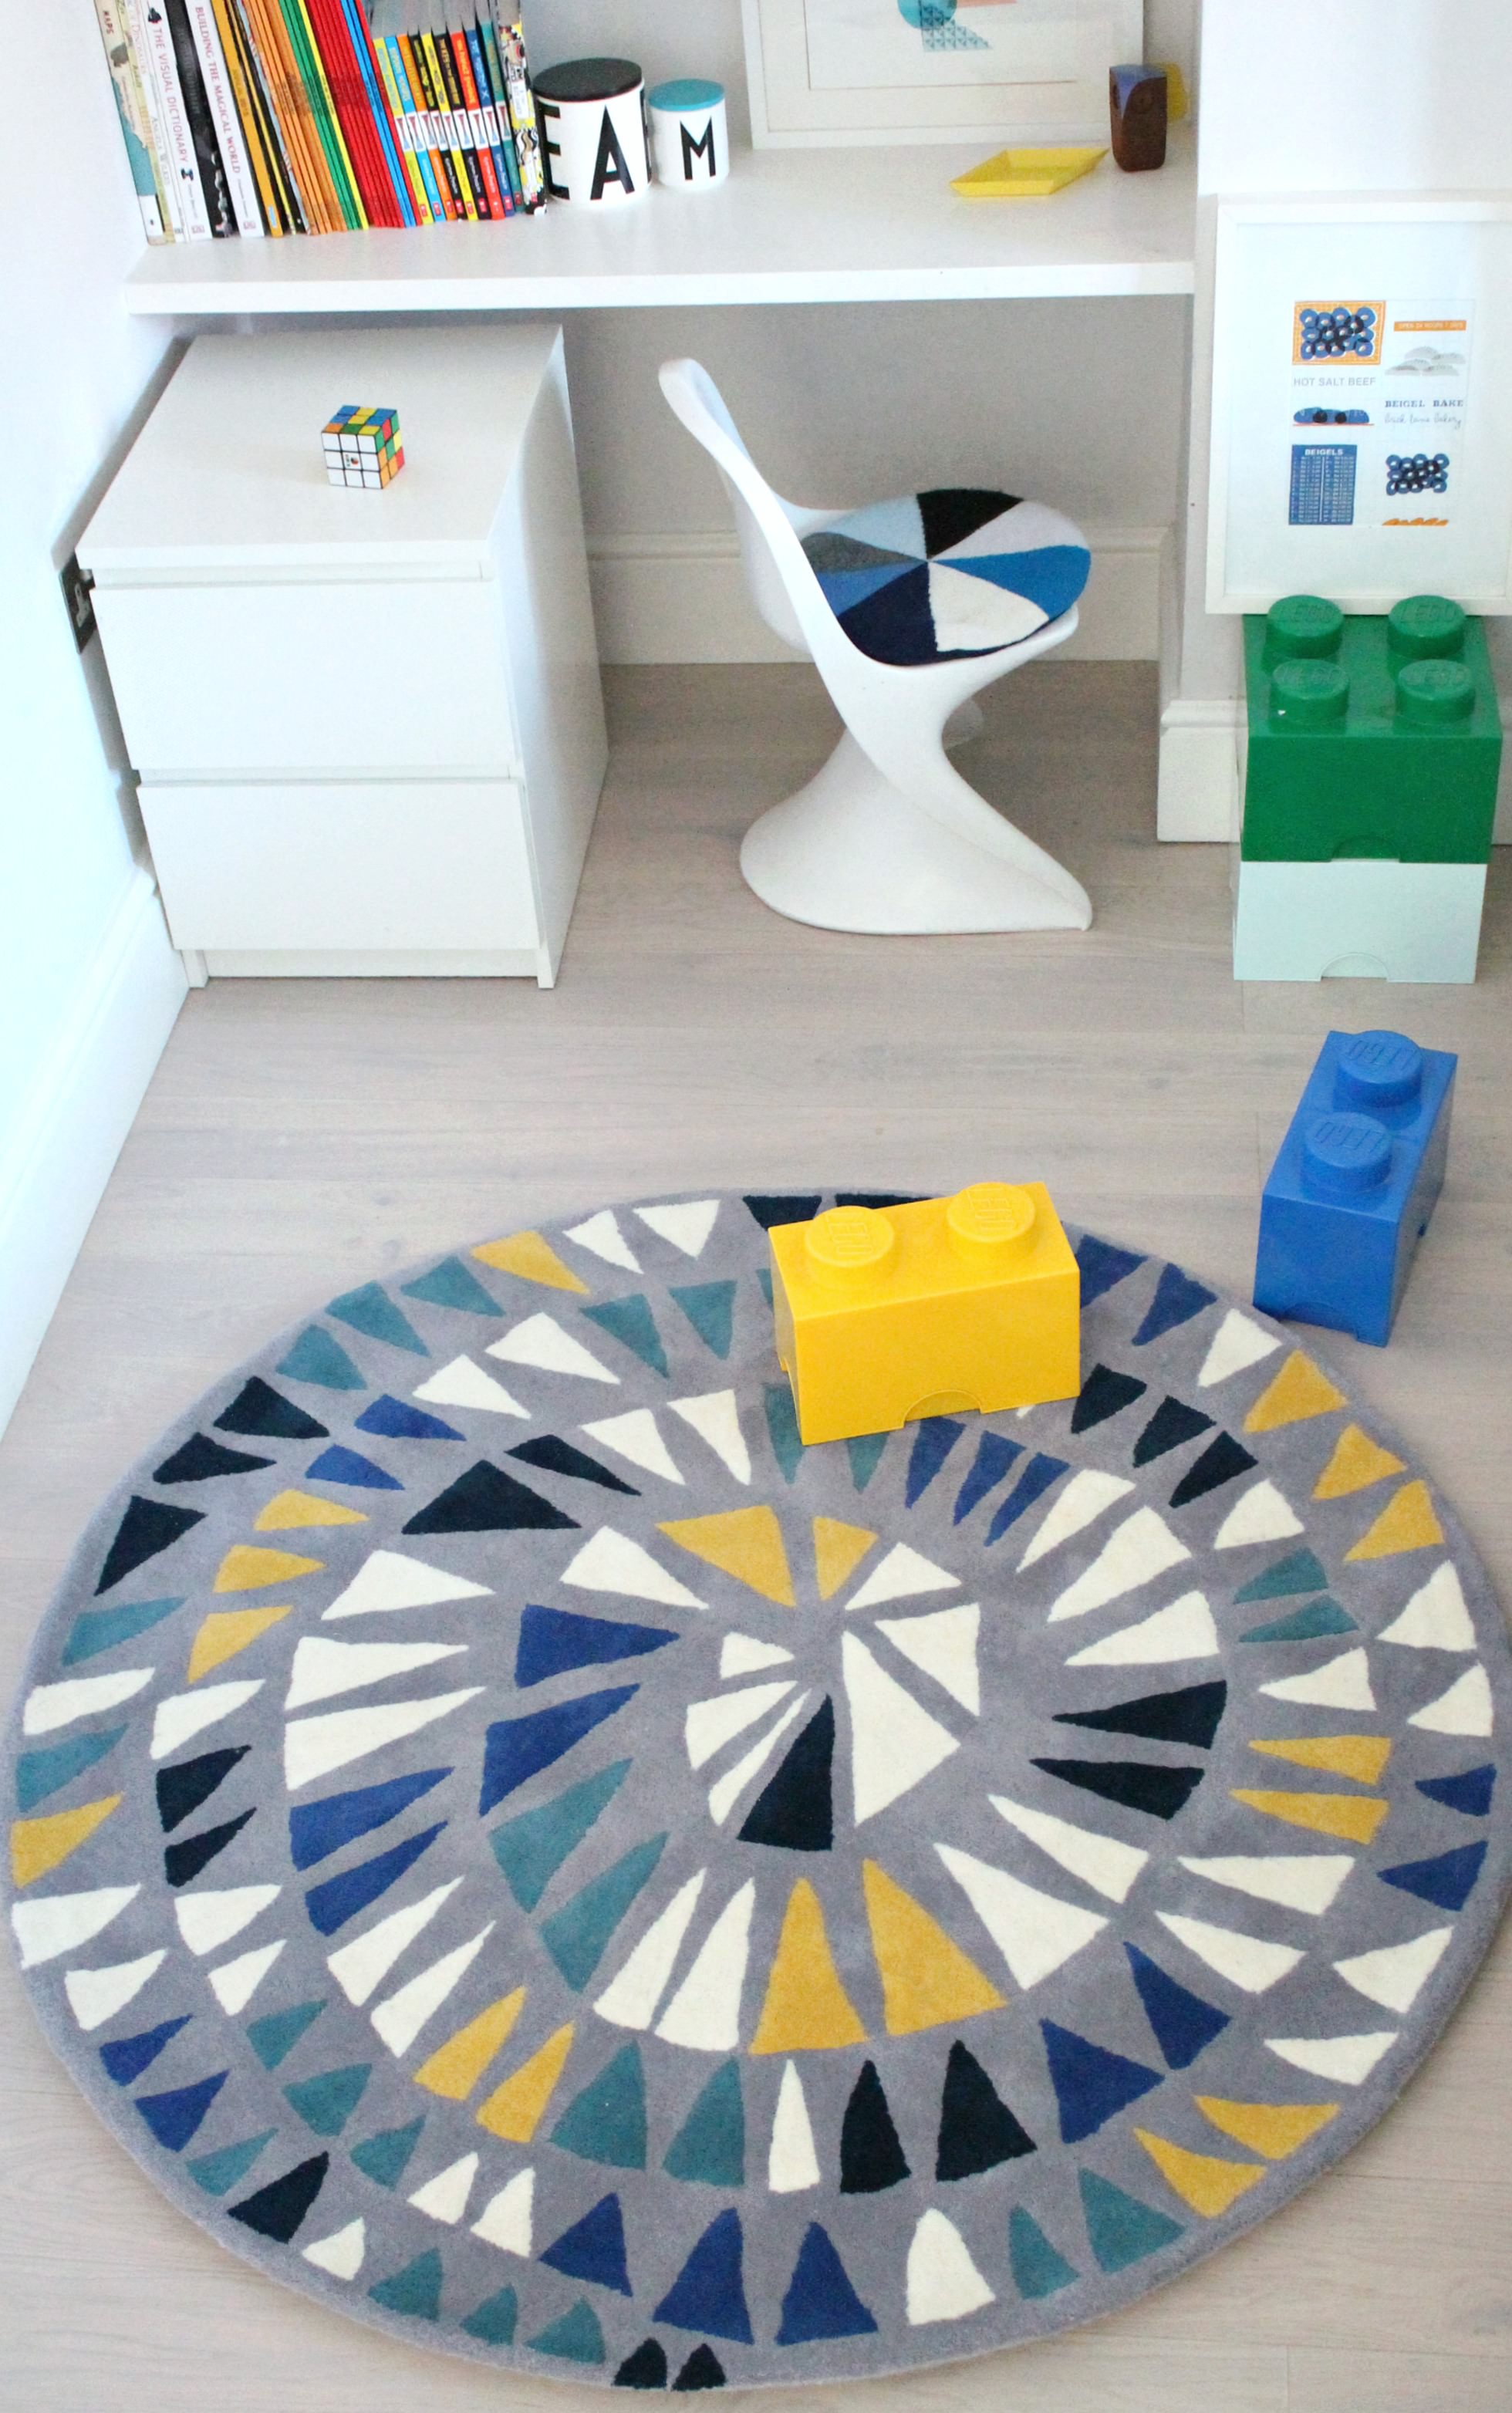 Little-P-Round-and-Round-rug-styled-and-photo-by-Geraldine-Tan-Little-Big-Bell